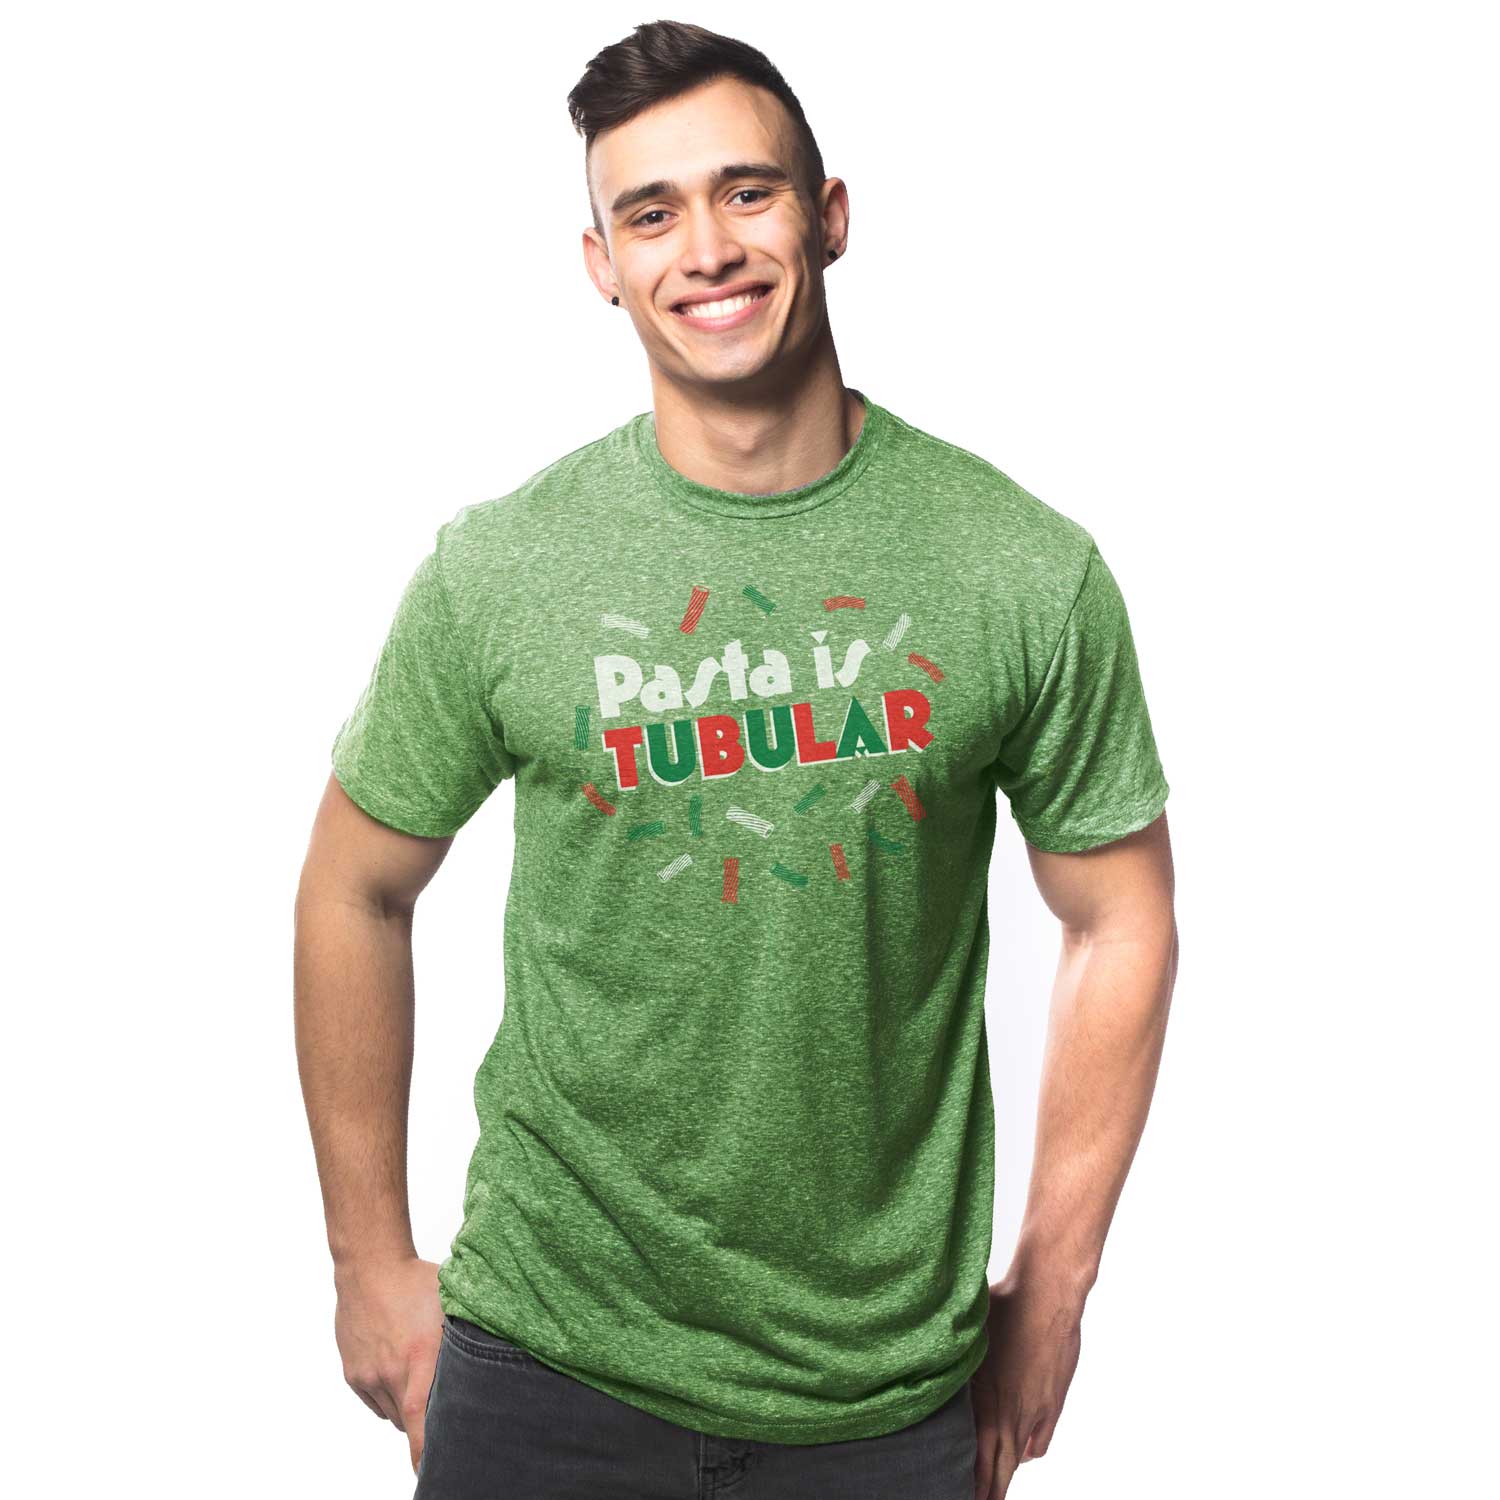 Men's Pasta Is Tubular Vintage Graphic T-Shirt | Funny Foodie Tee on Model | Solid Threads